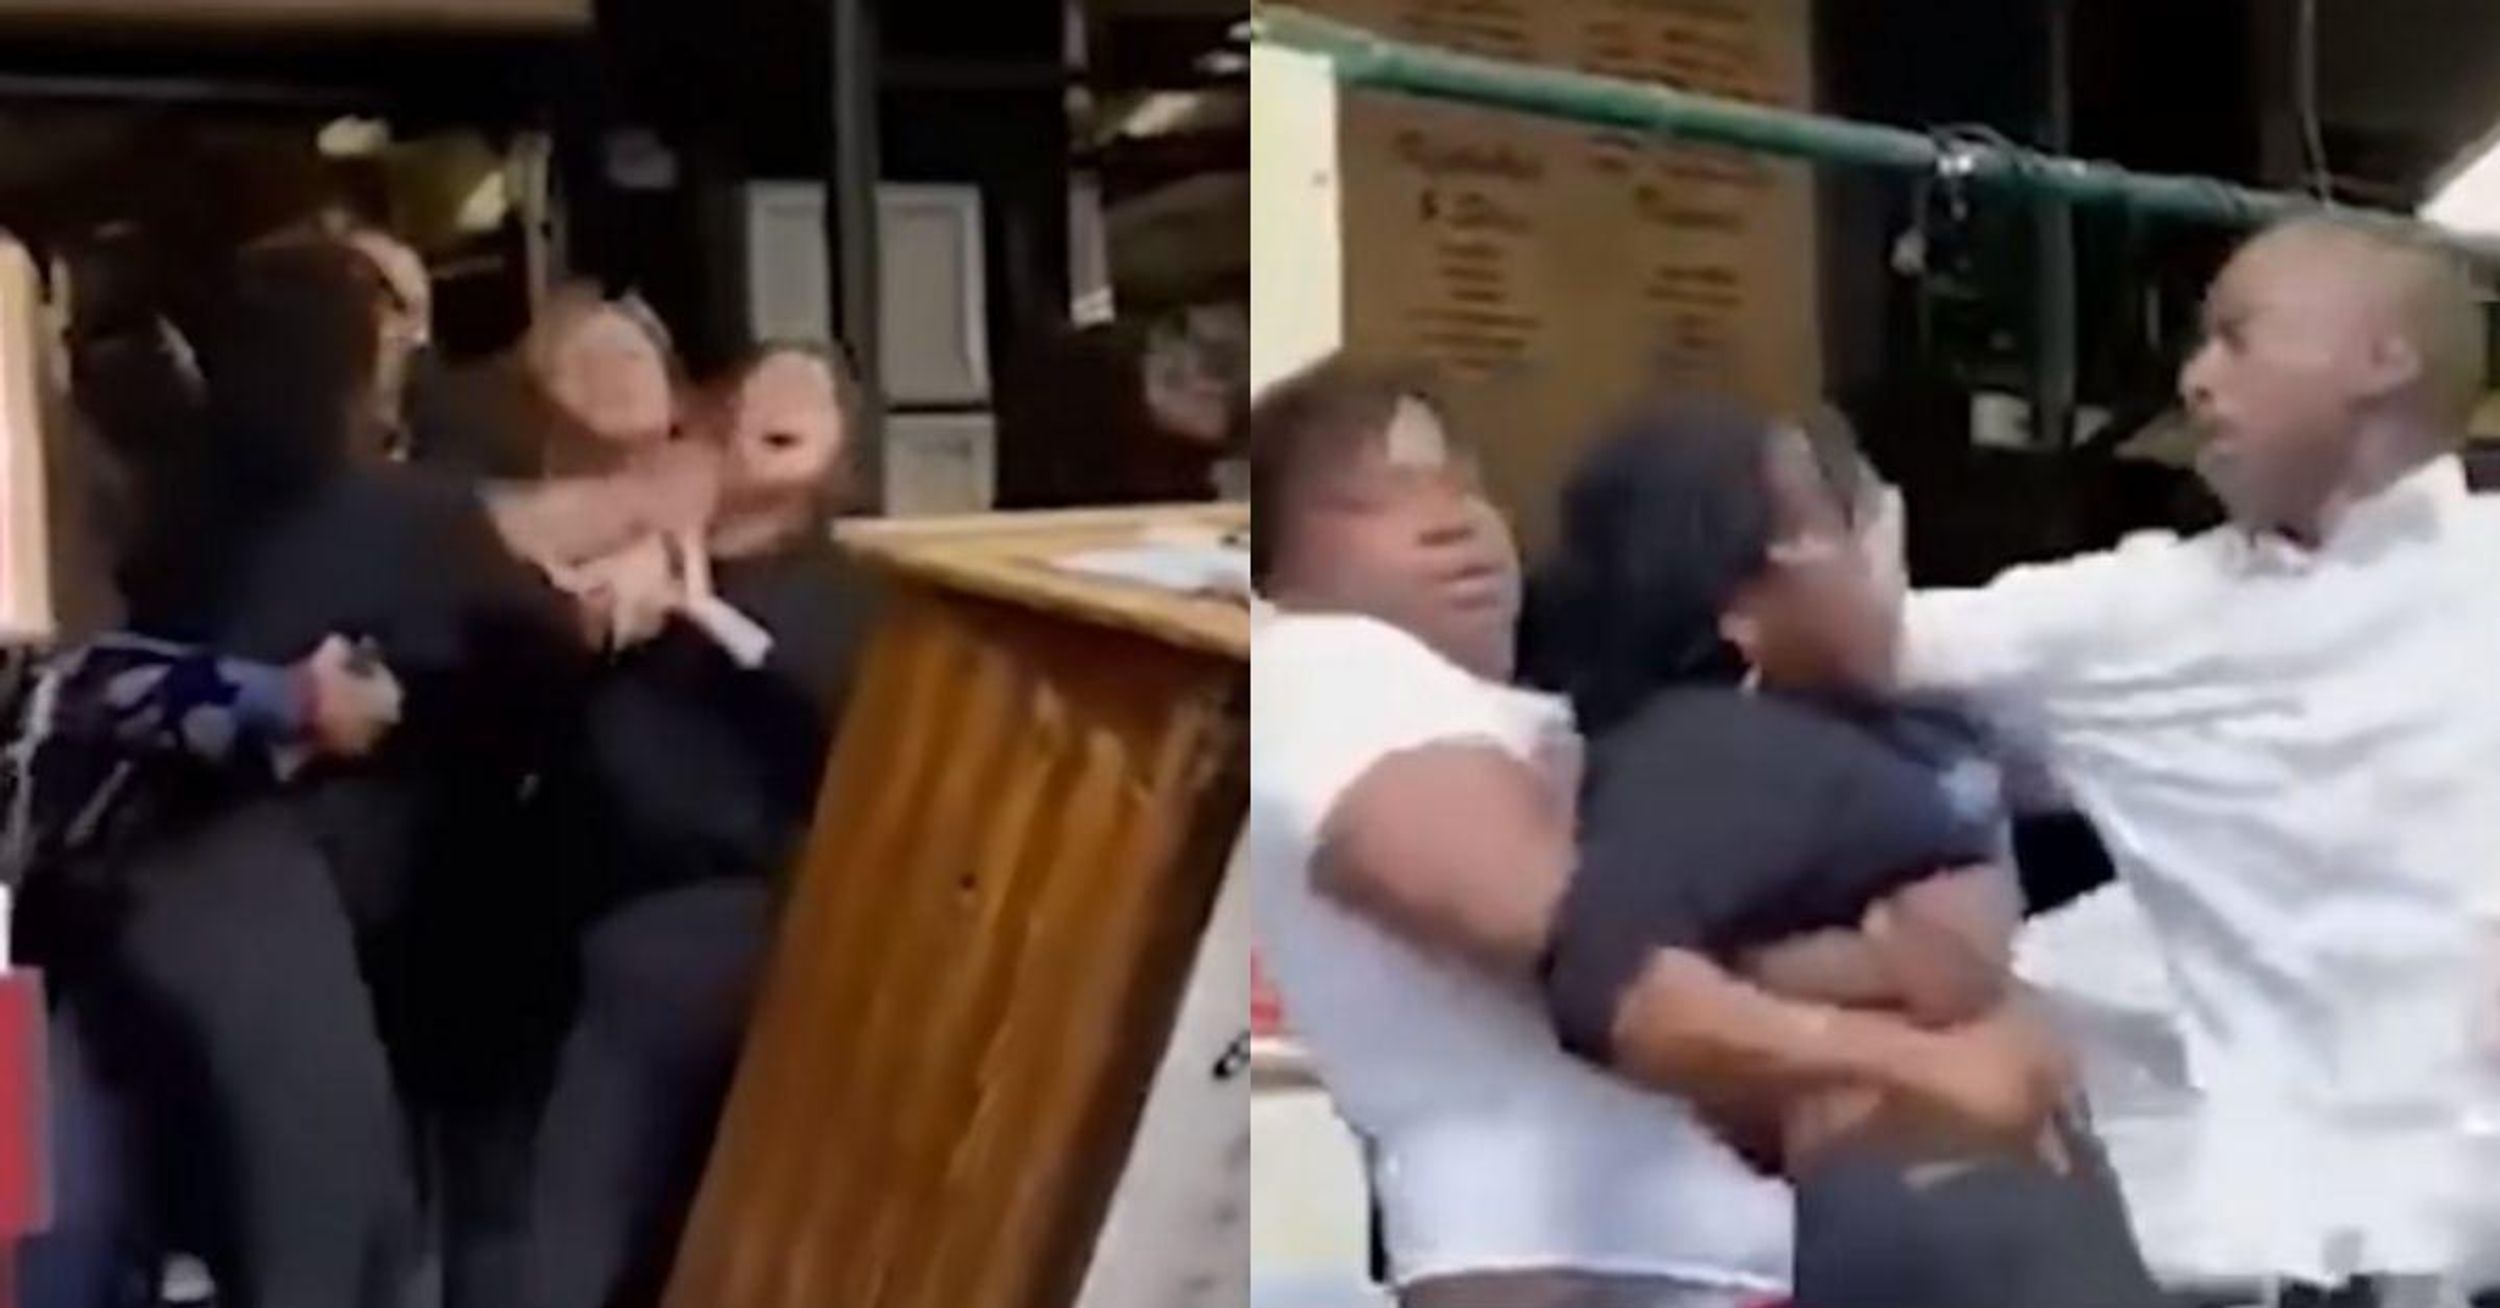 Texas Tourists Arrested After Altercation With NYC Restaurant Hostess Over Proof Of Vaccination